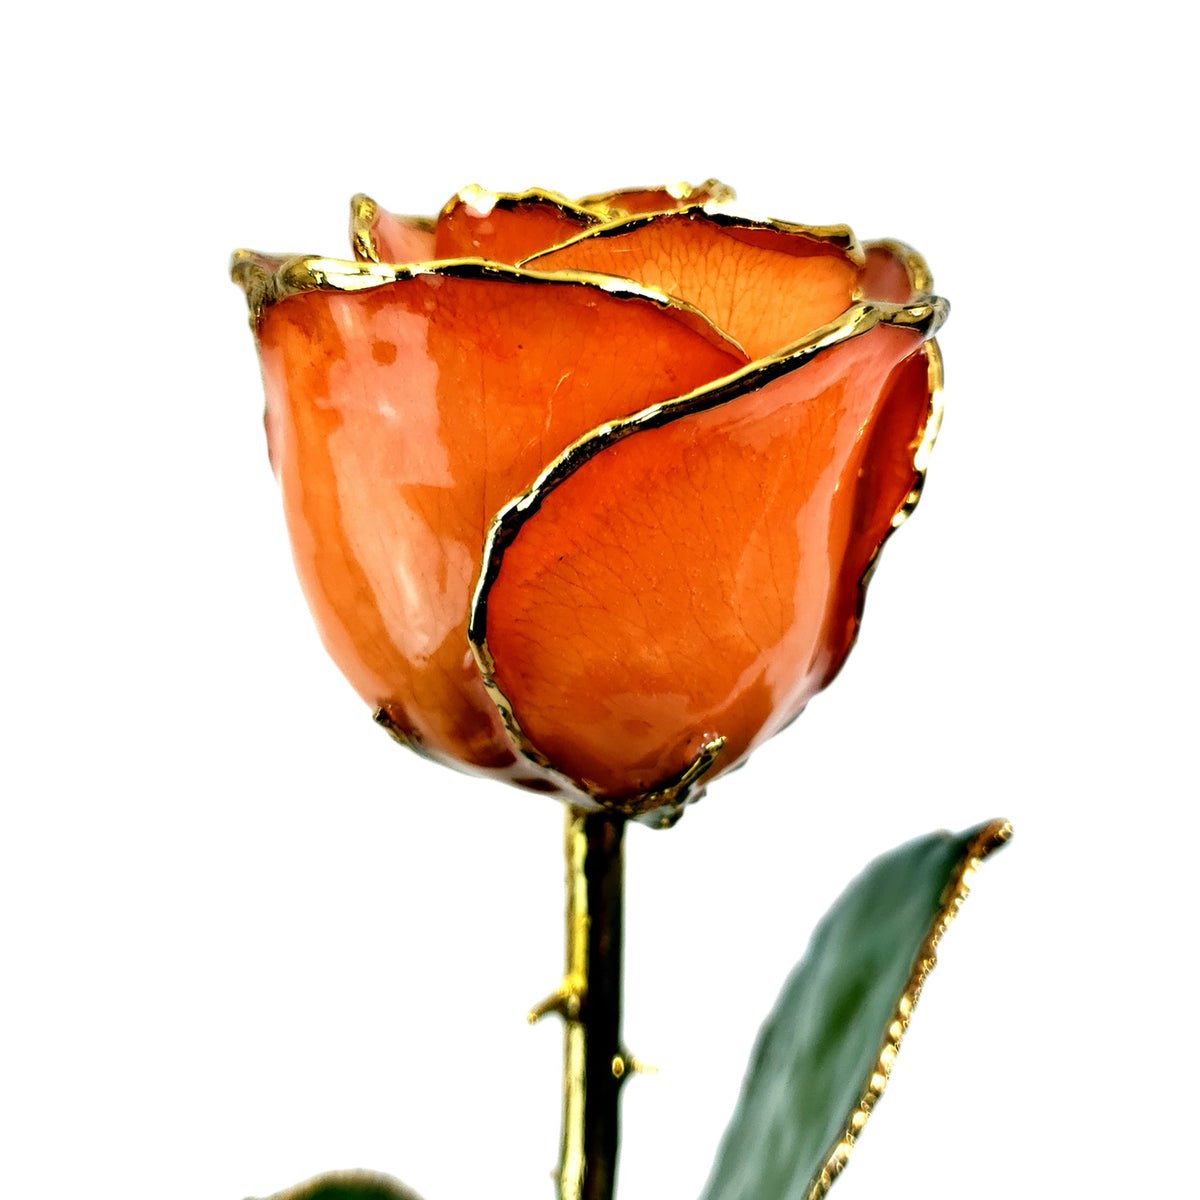 24K Gold Trimmed Forever Rose with Orange Petals. View of Stem, Leaves, and Rose Petals and Showing Detail of Gold Trim